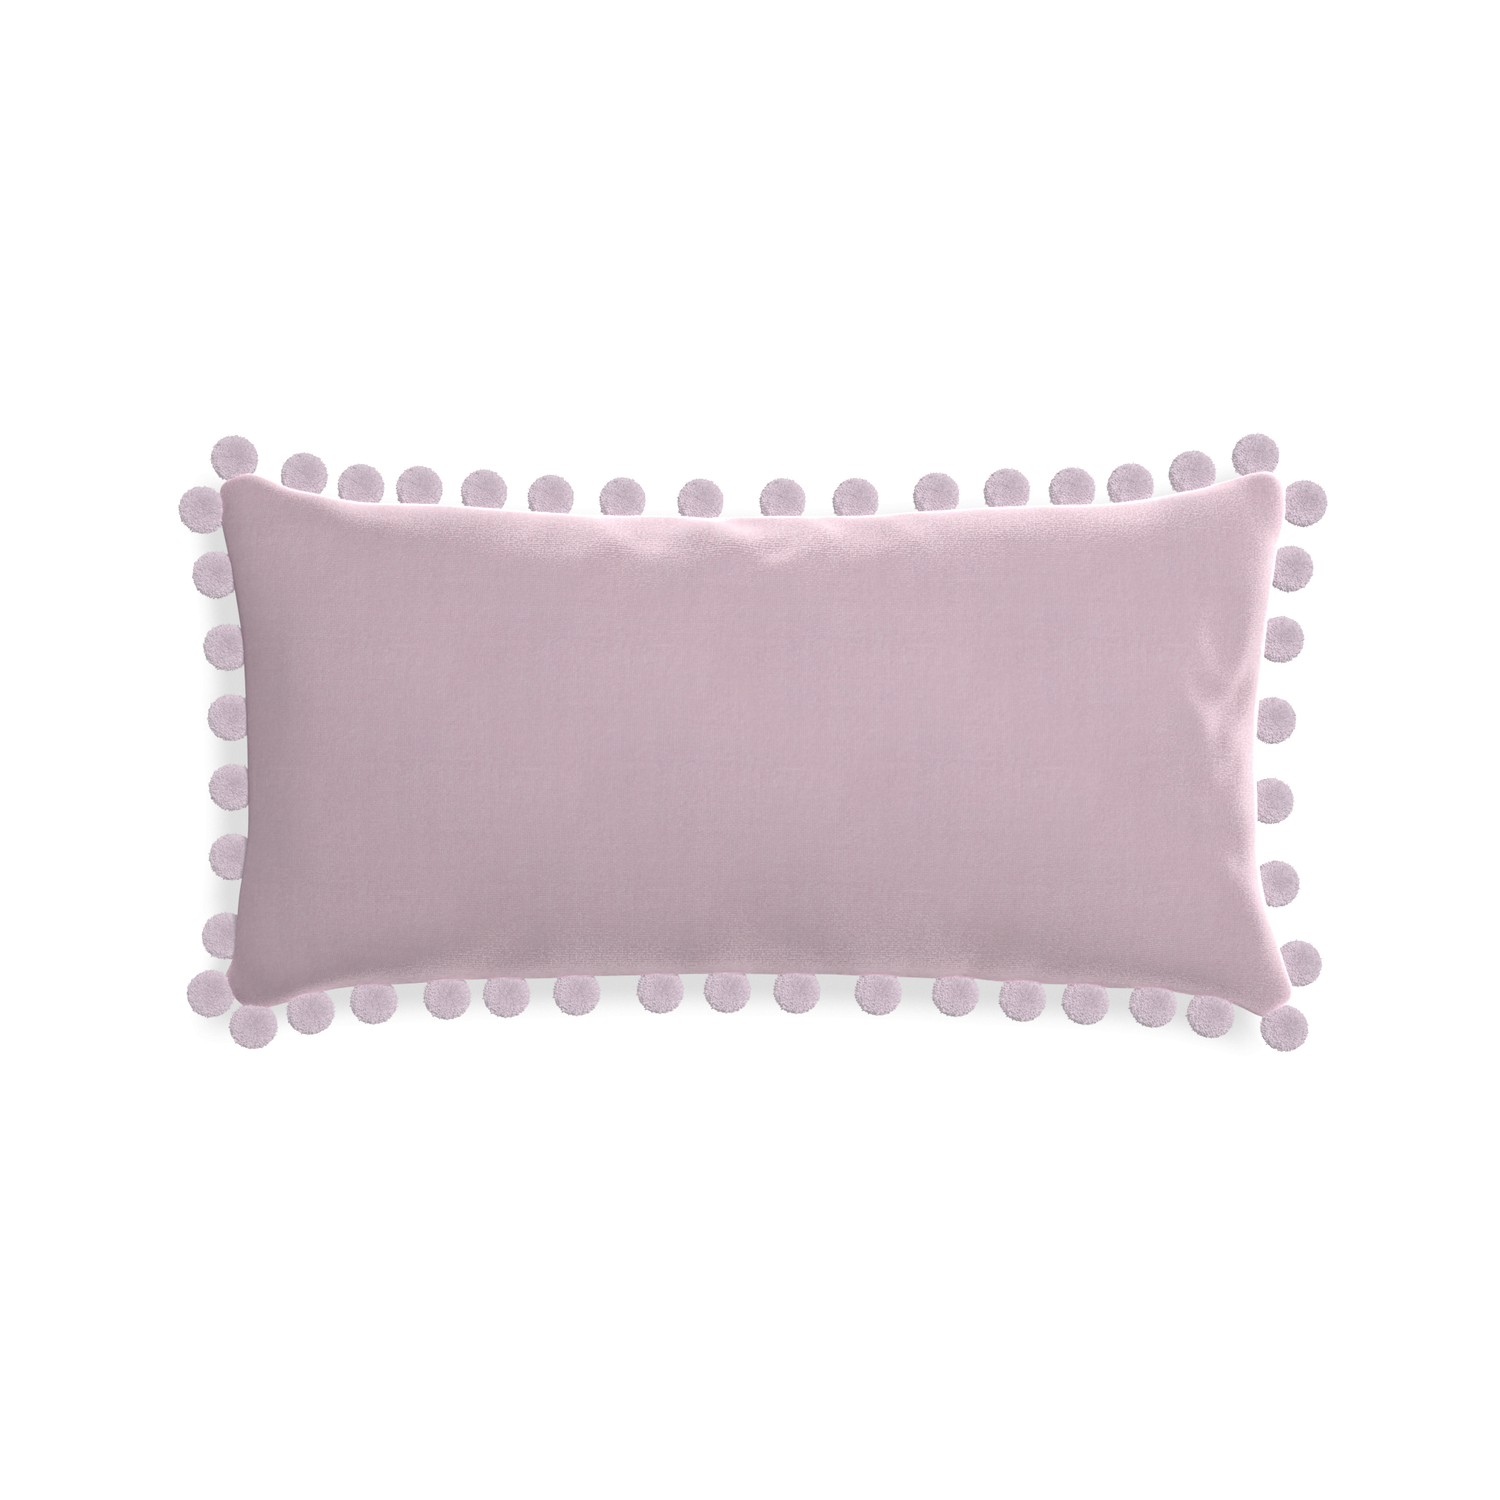 Midi-lumbar lilac velvet custom lilacpillow with l on white background